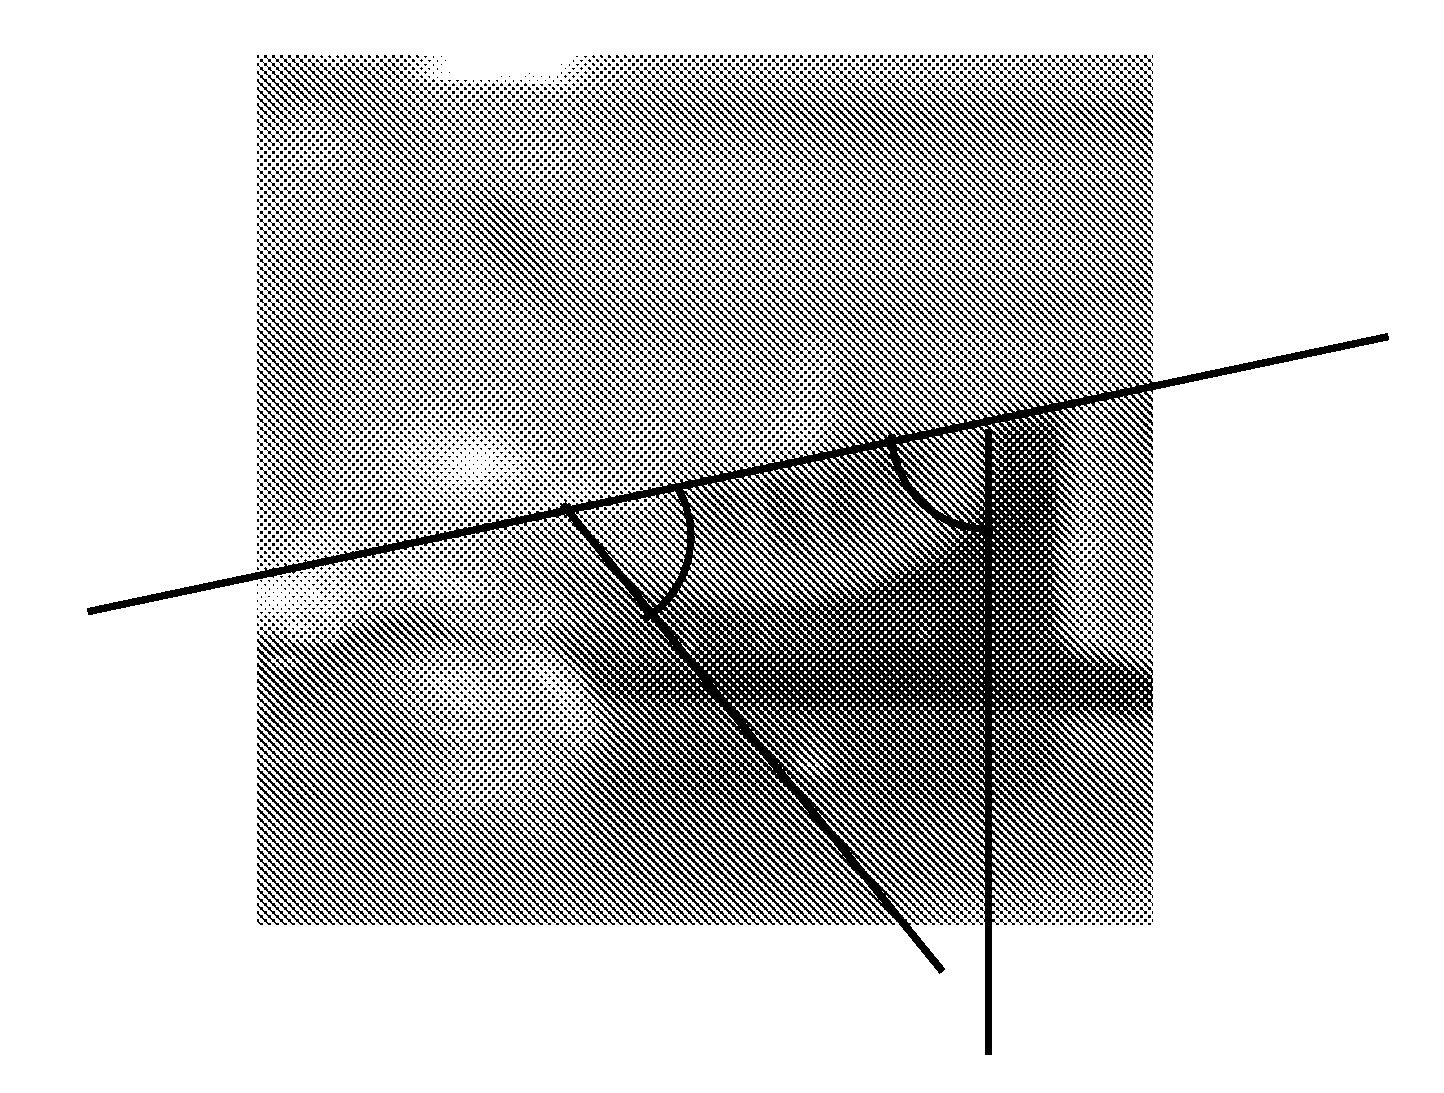 Method for recovering crude oil from a subterranean formation